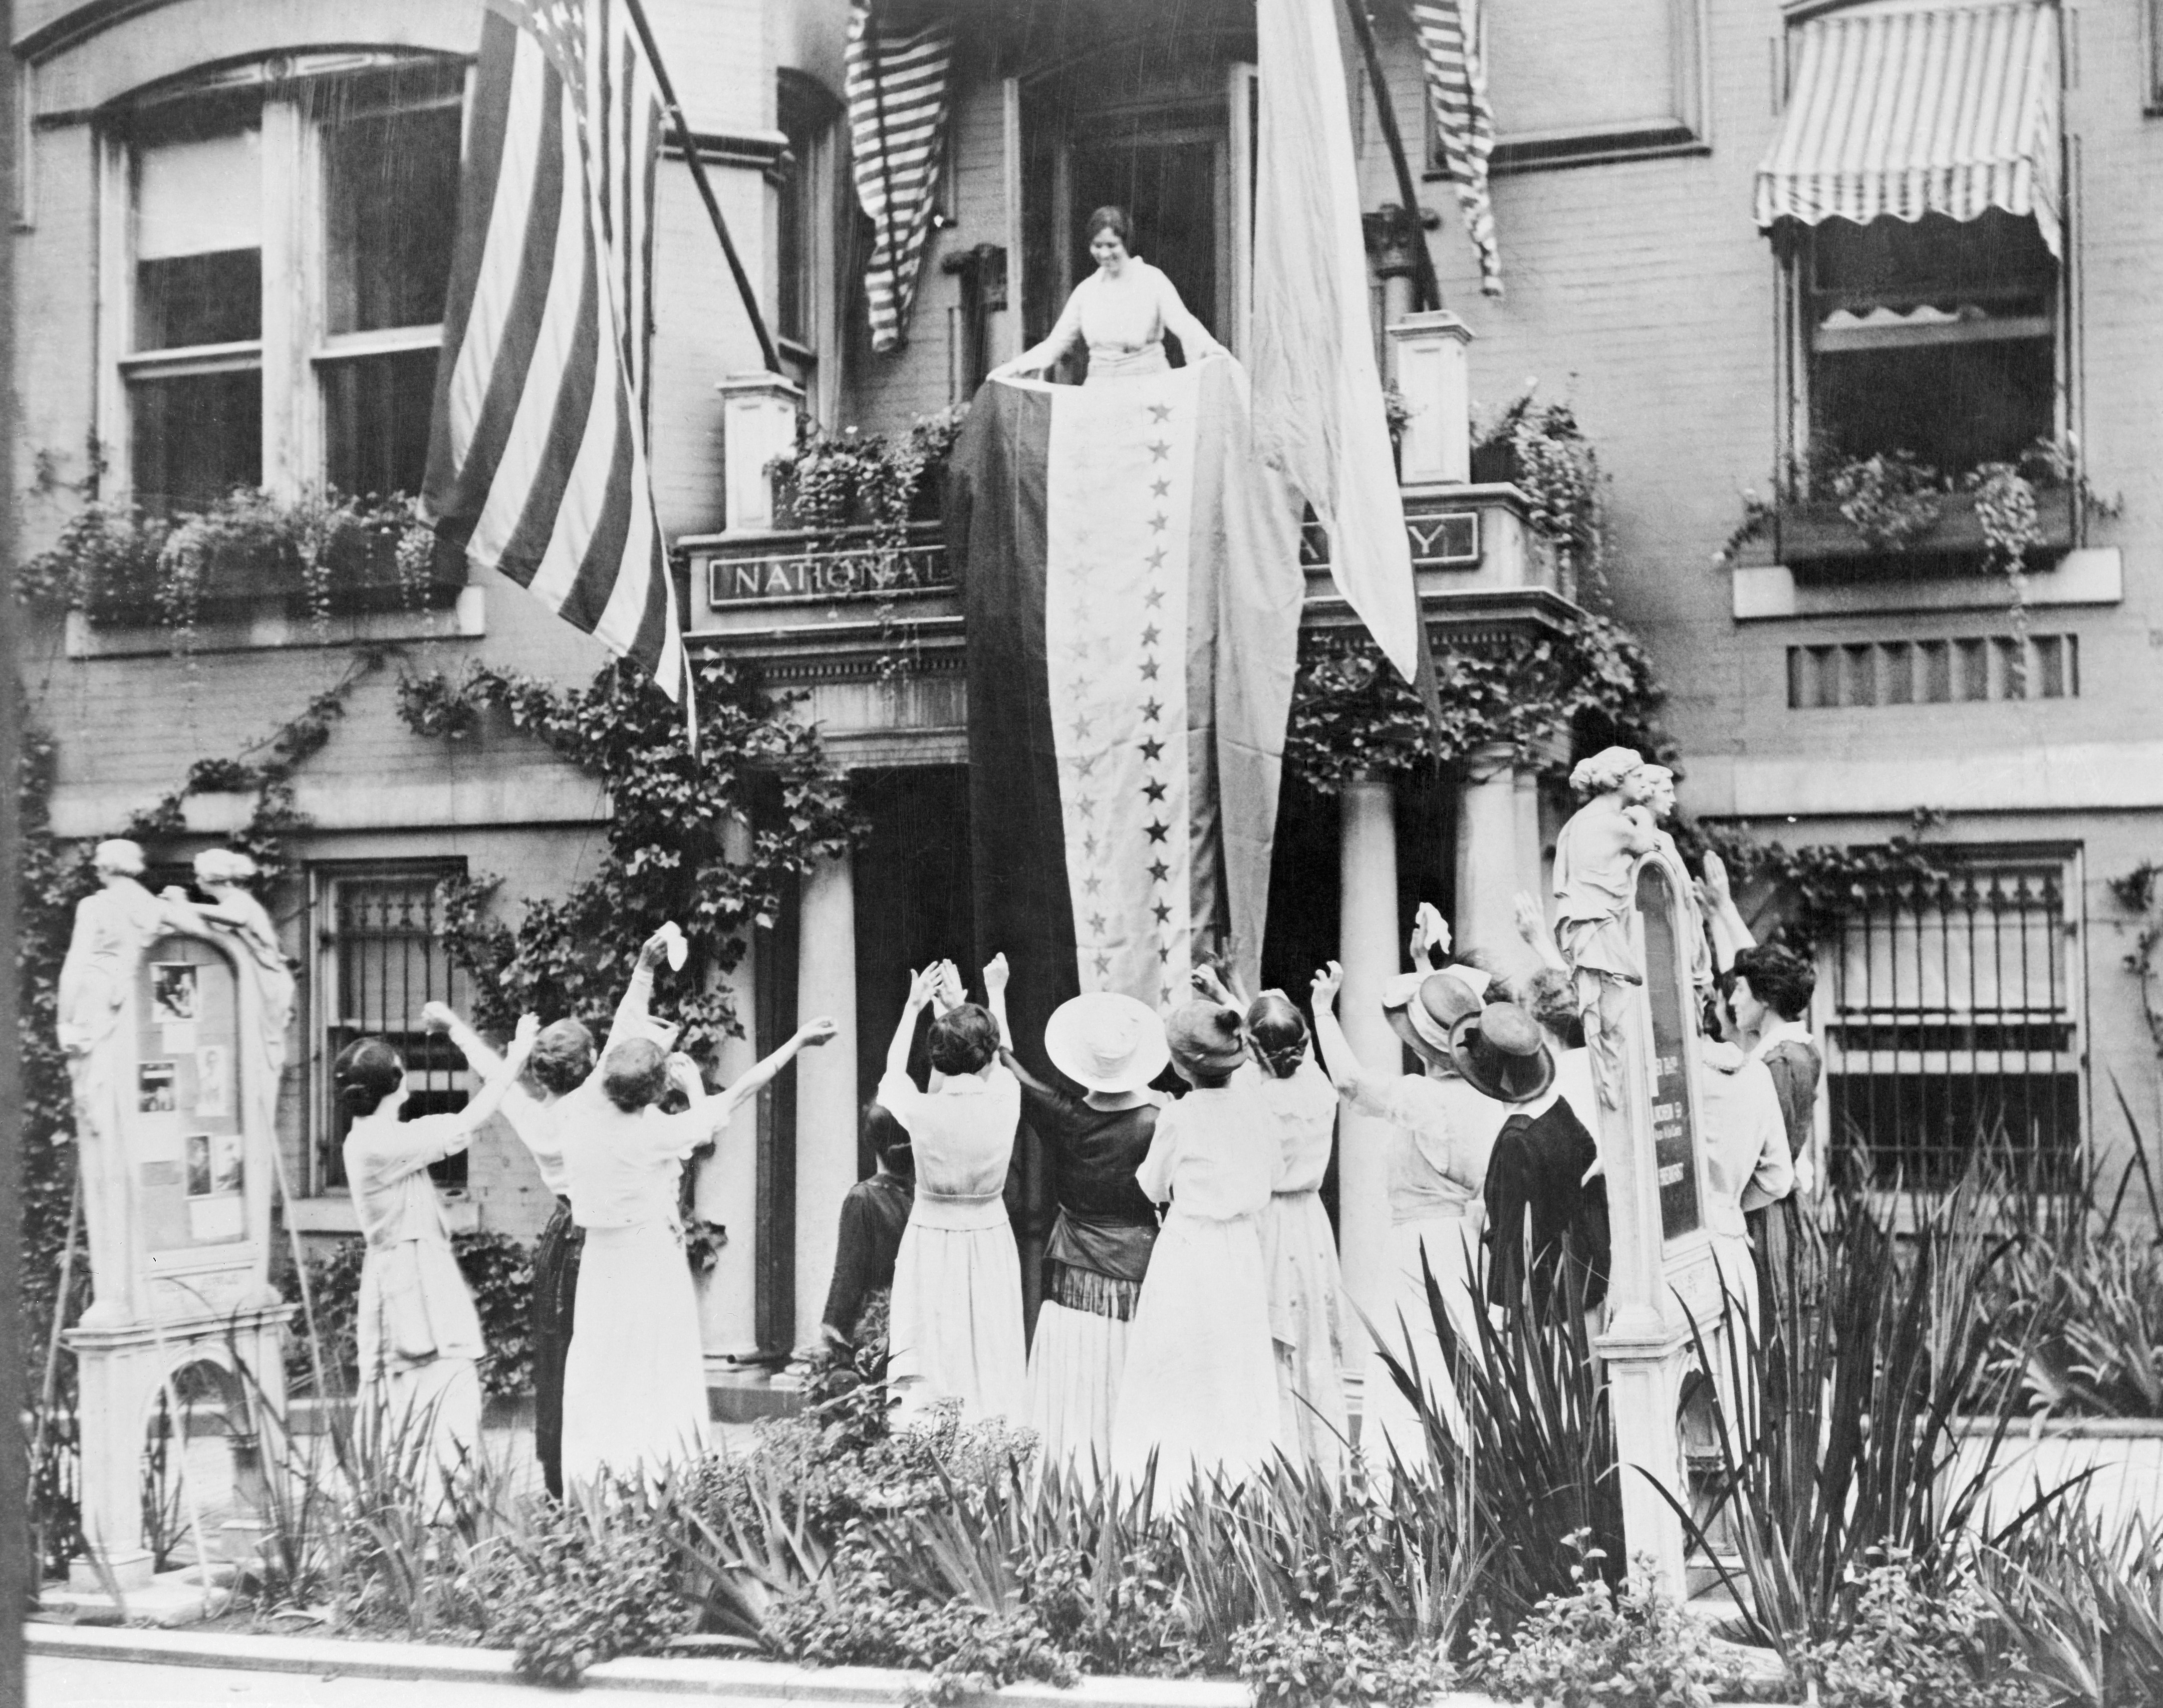 Alice Paul unfurls a banner from the balcony of the National Women's Party headquarters, showing a star for each state which has ratified the 19th Amendment, giving women the right to vote. The women are celebrating the ratification of the amendment by Tennessee, making the amendment law. (Bettmann/Getty Images)